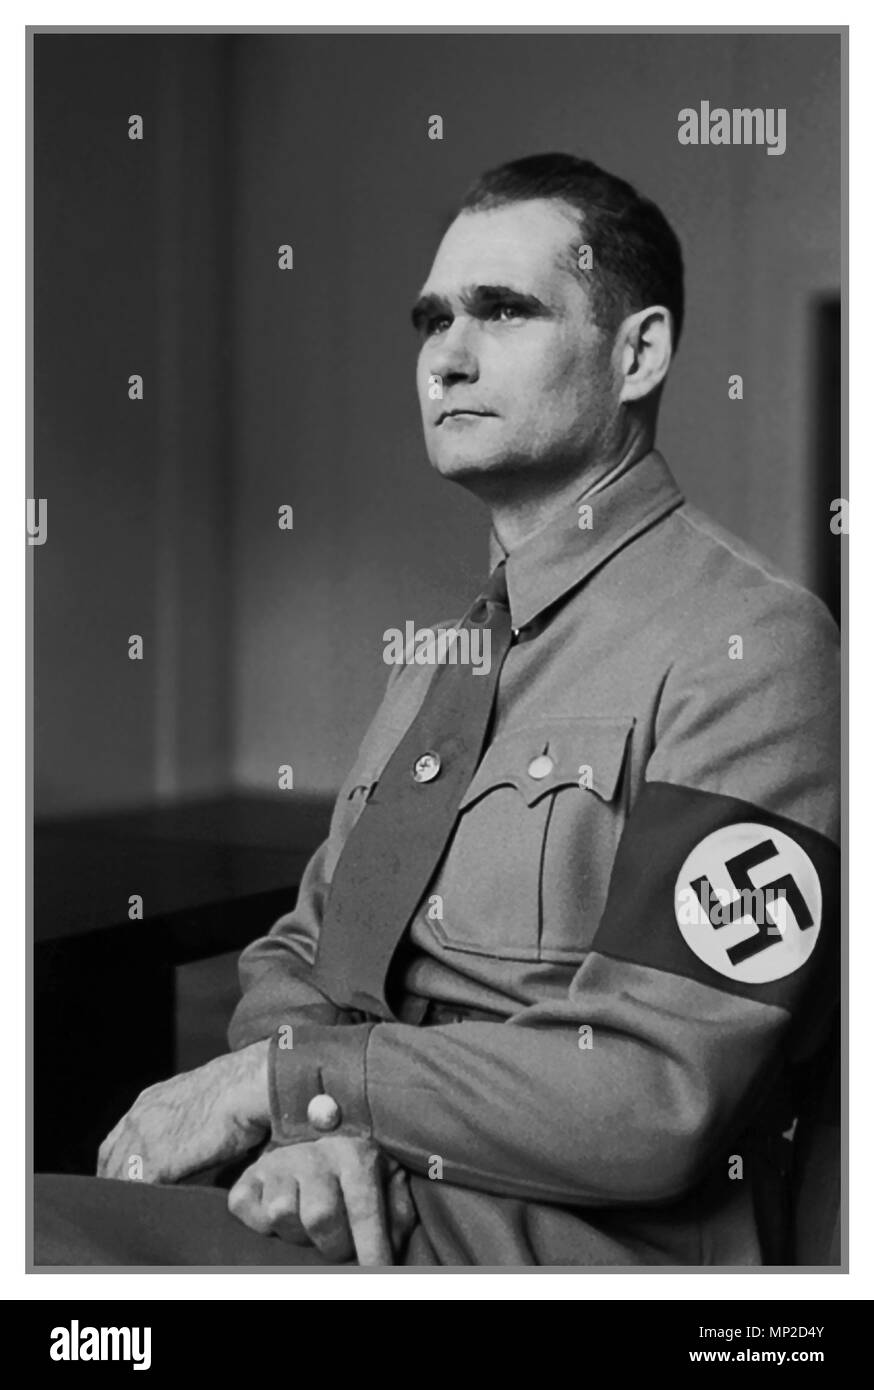 1930's Vintage historic formal portrait of Rudolf Hess wearing a Nazi Swastika Armband. Hess was a prominent politician in Nazi Germany. Appointed Deputy Führer to Adolf Hitler in 1933, he served in this position until 1941, when he flew solo to Scotland in an attempt to negotiate peace with the United Kingdom during World War II. He was taken prisoner and eventually was convicted of crimes against peace, serving a life sentence in Spandau prison until his suicide Stock Photo